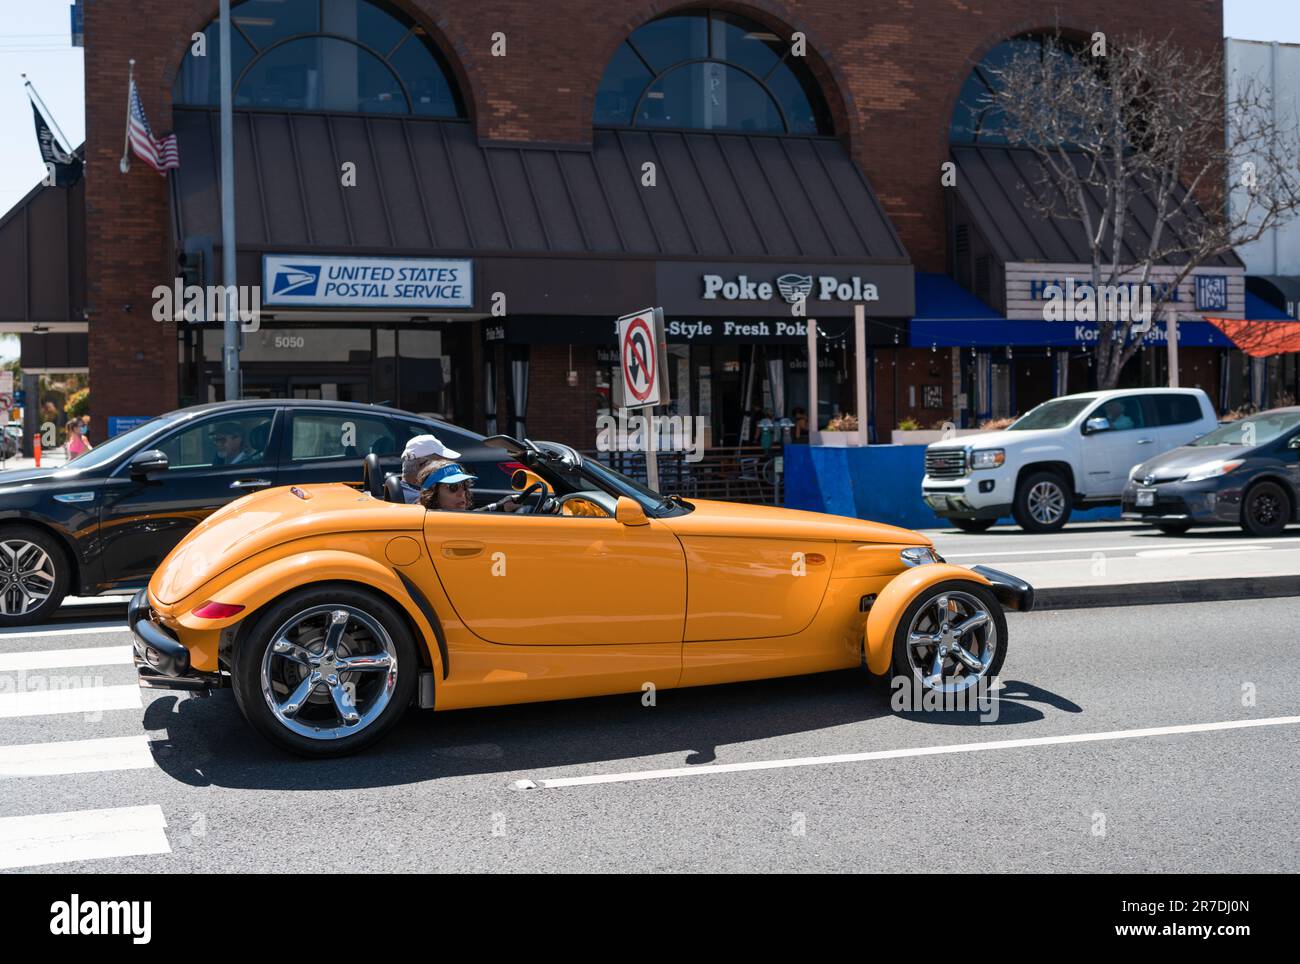 Long Beach, California USA - March 31, 2021: classic vehicle of yellow Chrysler Plymouth Prowler Stock Photo